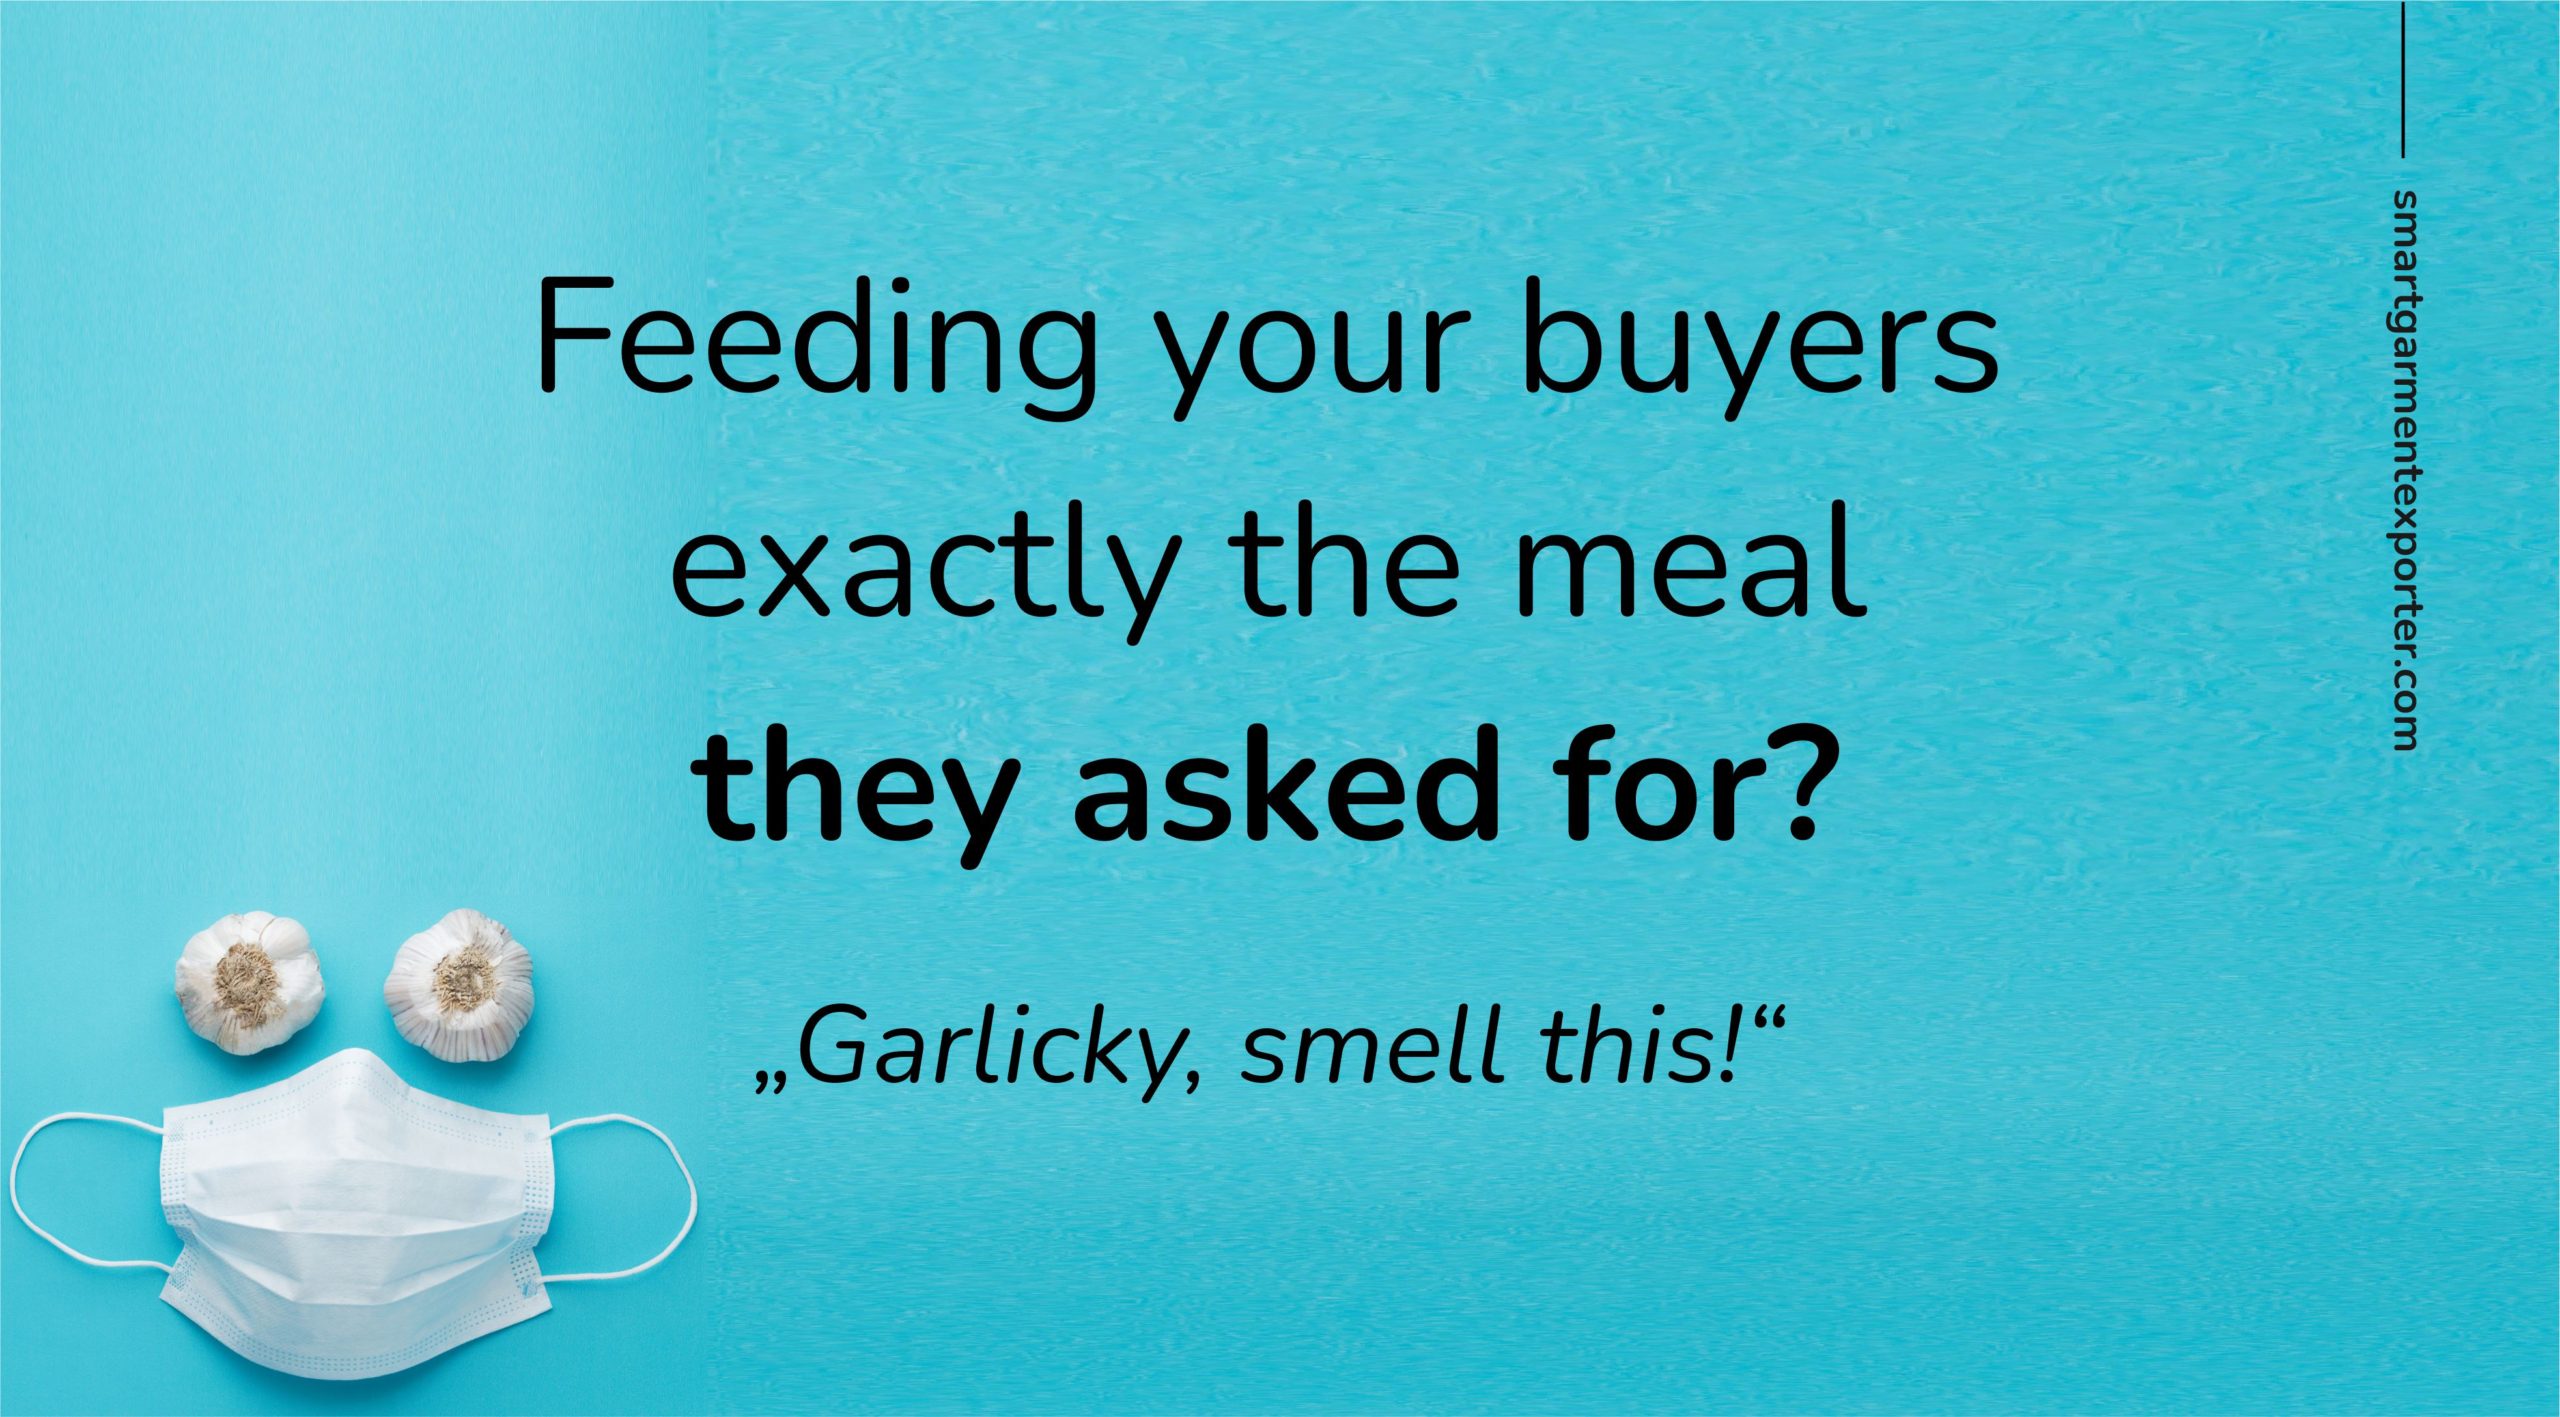 “Garlicky, smell this“ Feeding your buyers exactly the meal they asked for